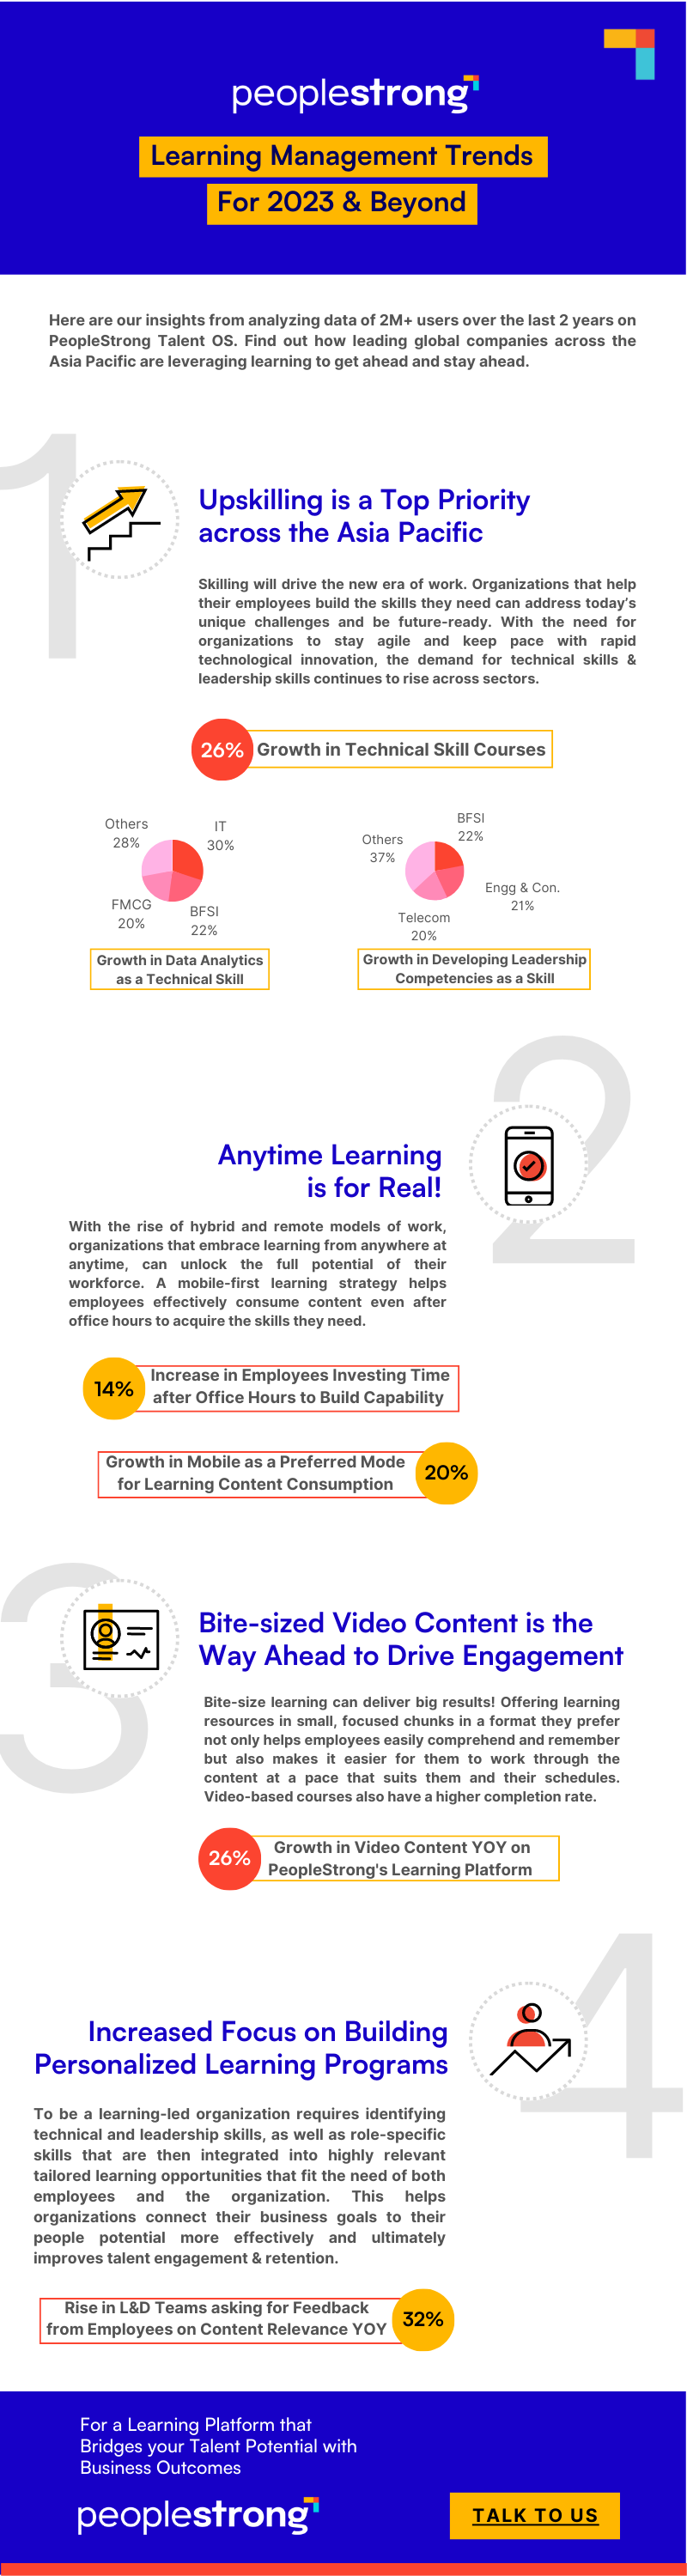 Learning Management Trends 2023 Infographic